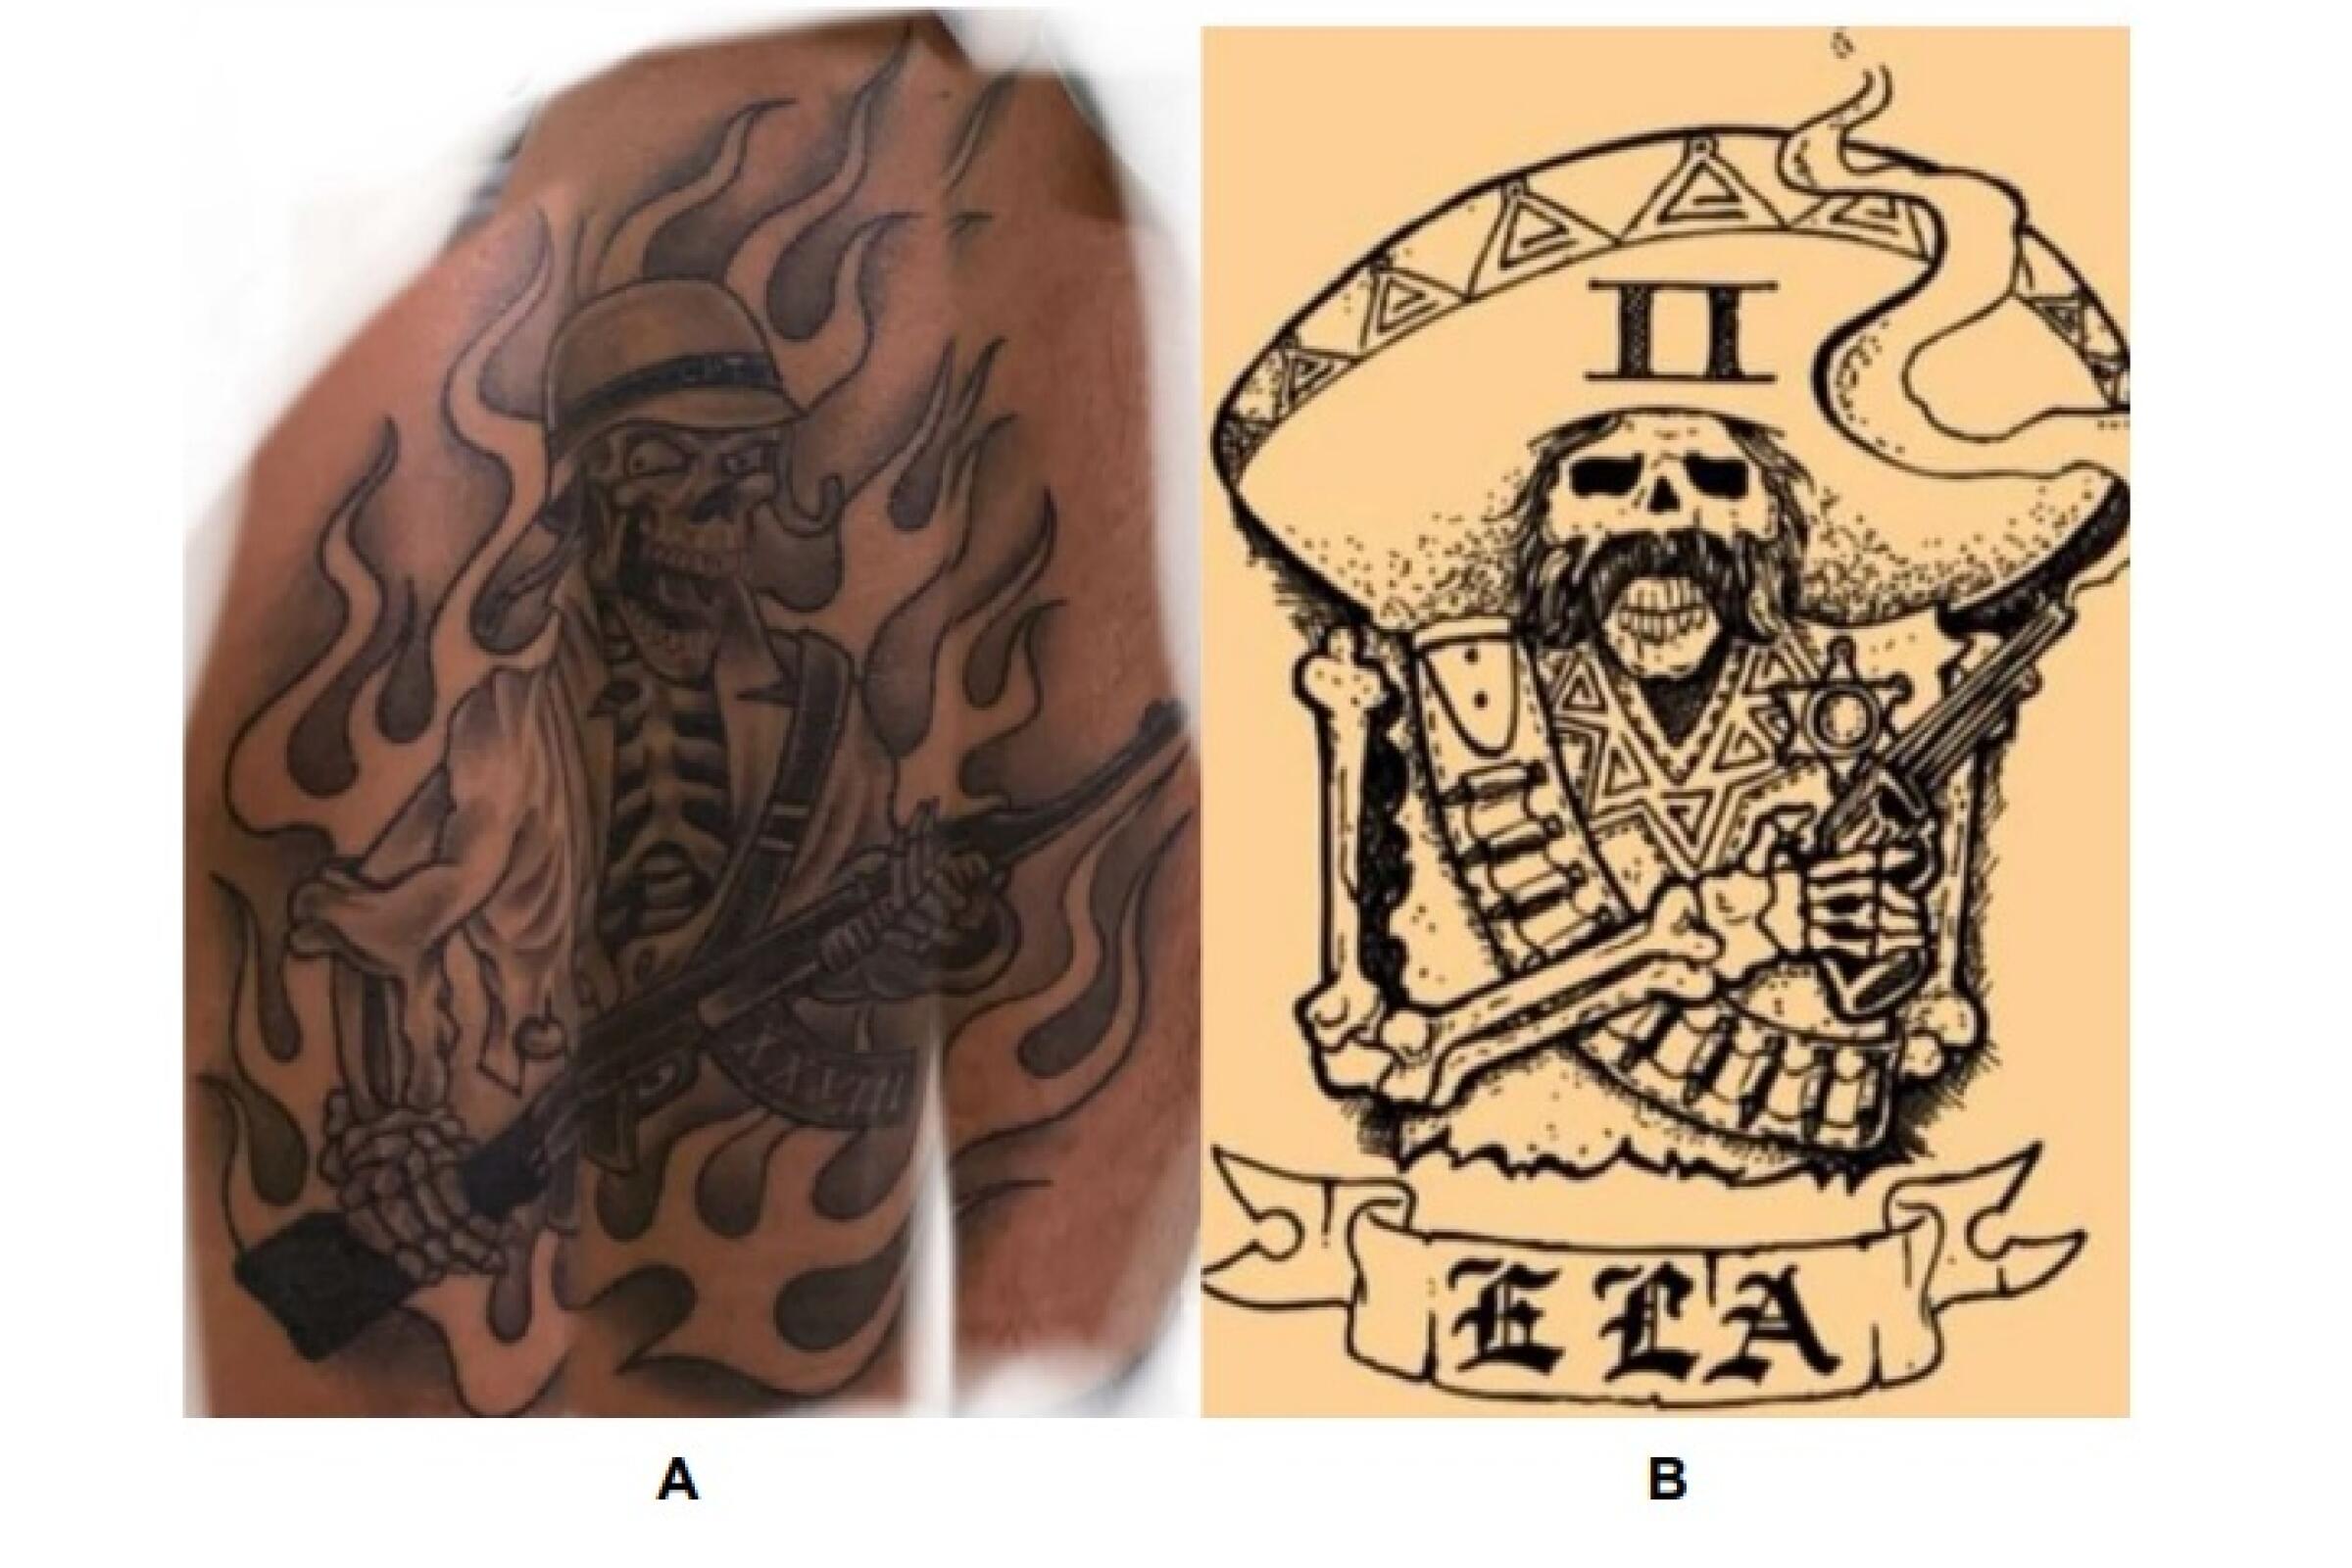 Side-by-side photos of tattoos depicting skeletons with firearms